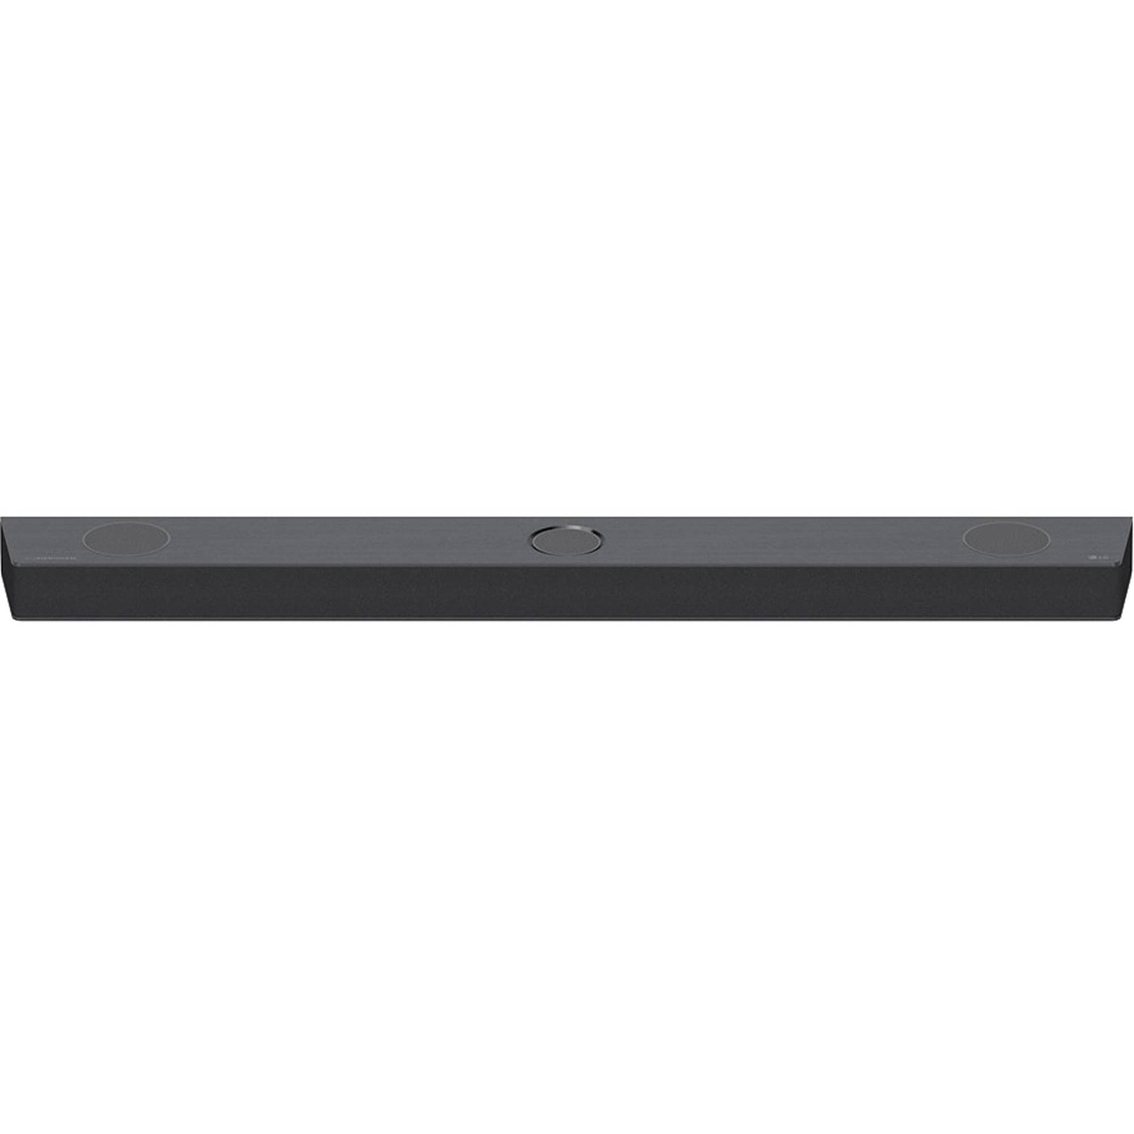 LG S90QY 5.1.3 Channel 570W High Res Sound Bar with Dolby Atmos and Apple Airplay 2 - Image 4 of 8